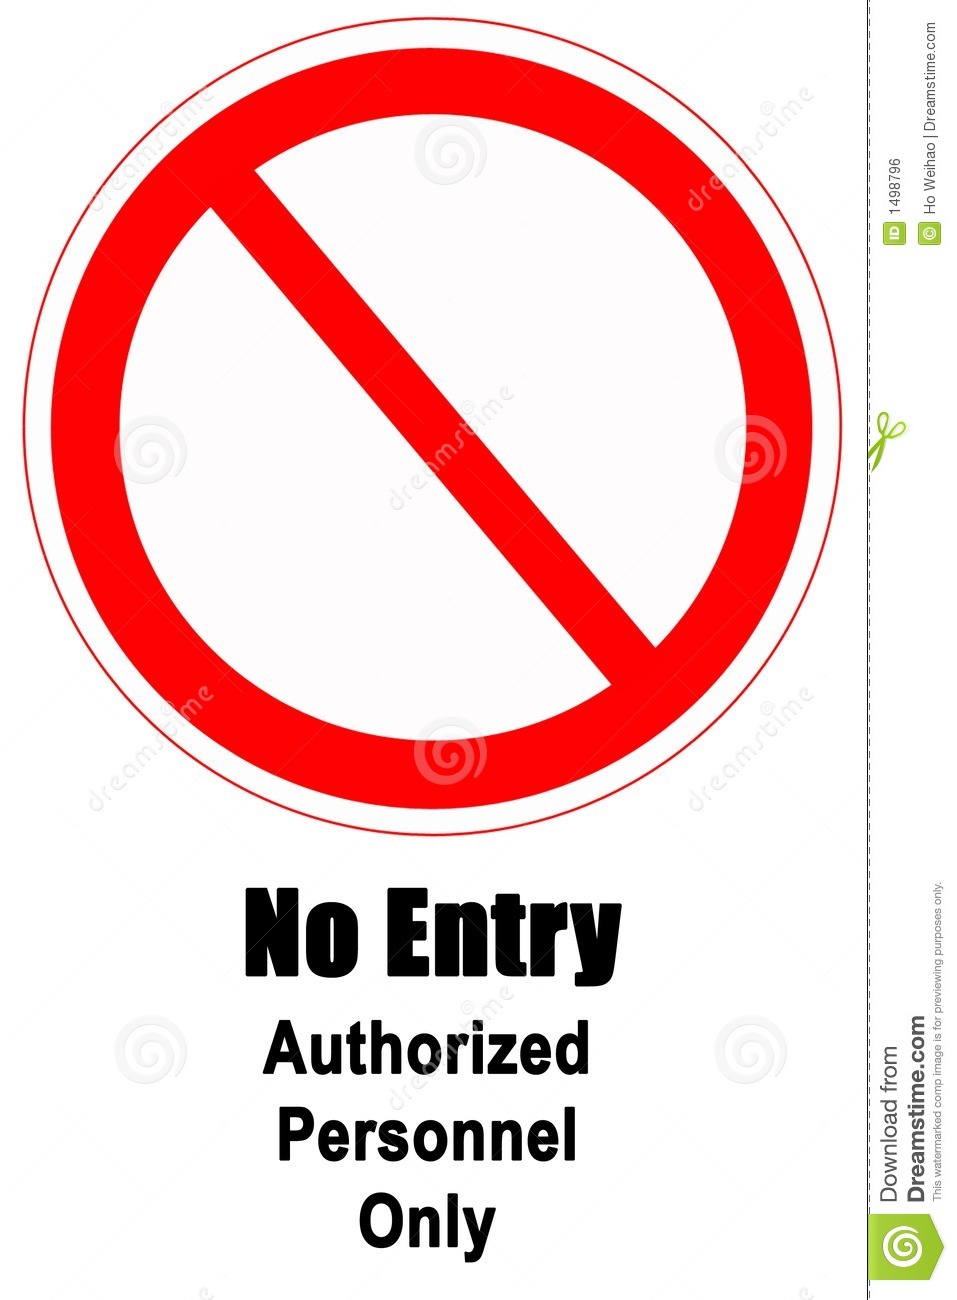 No Entry Sign Royalty Free Stock Image   Image  1498796